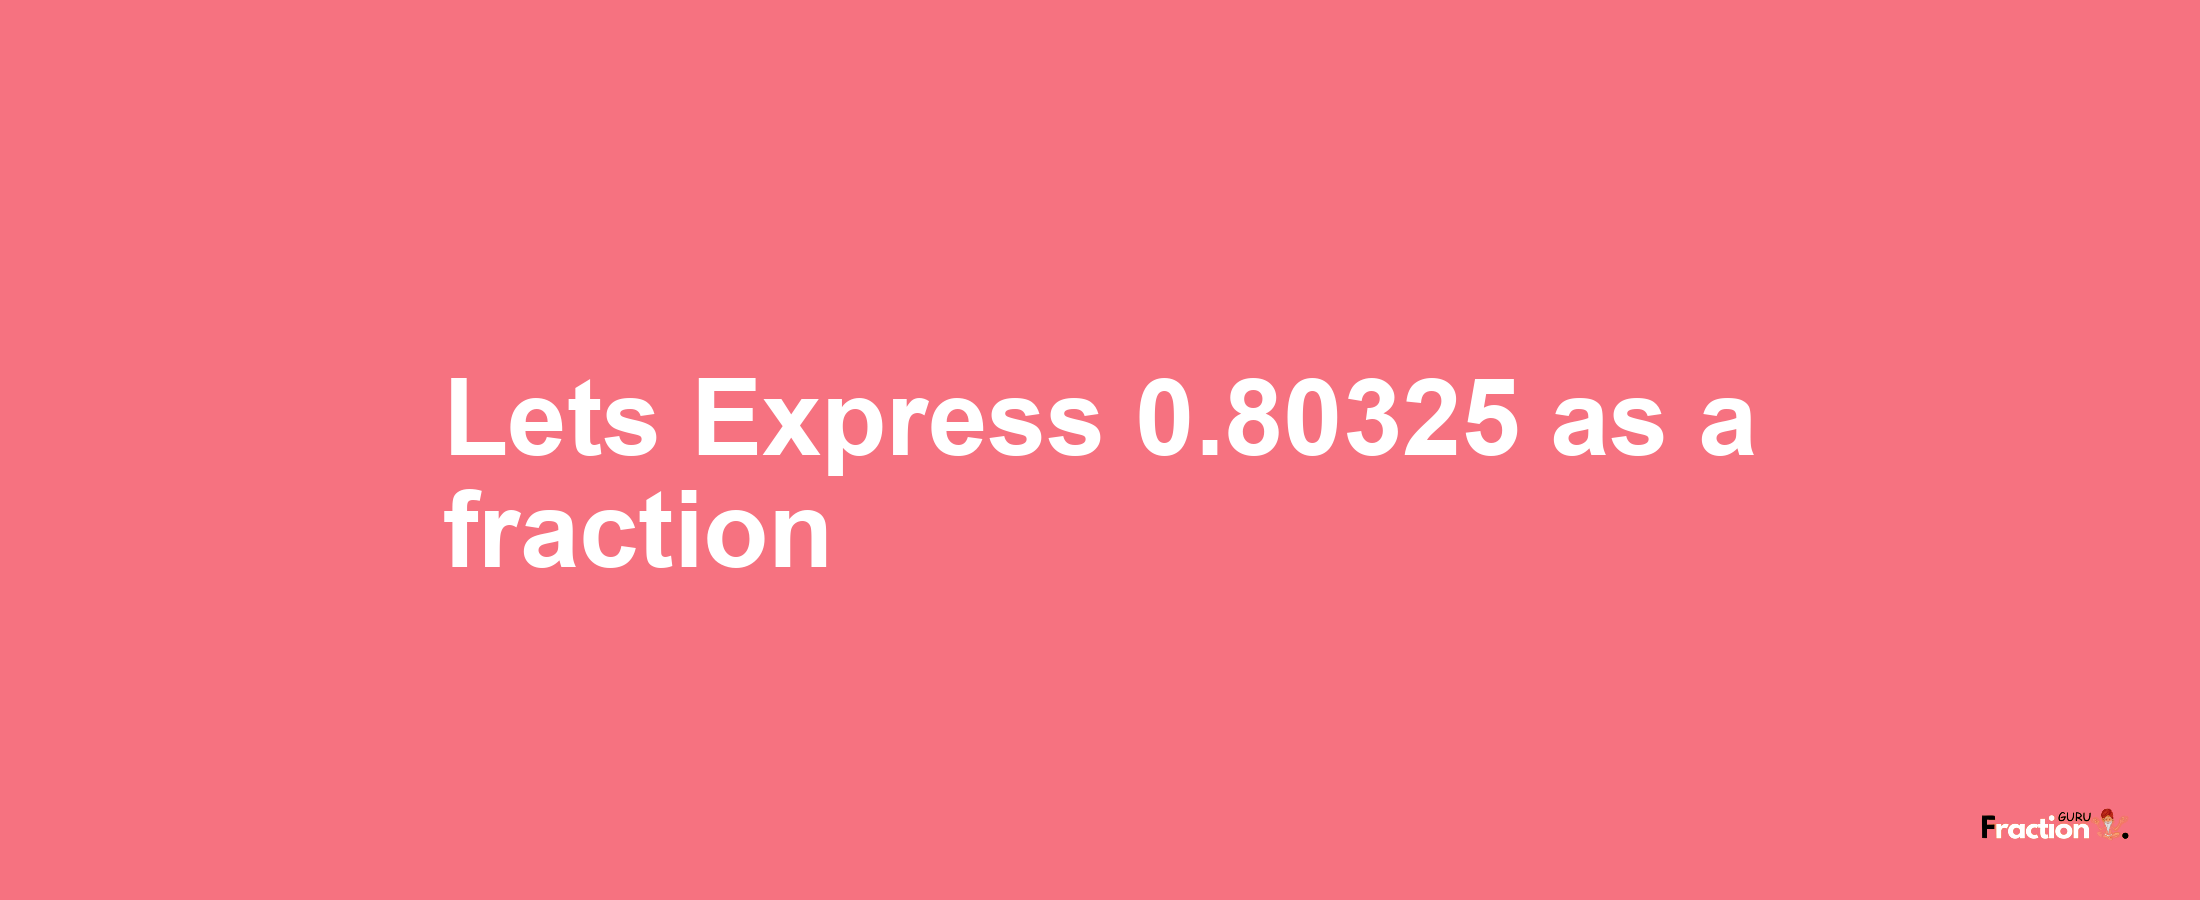 Lets Express 0.80325 as afraction